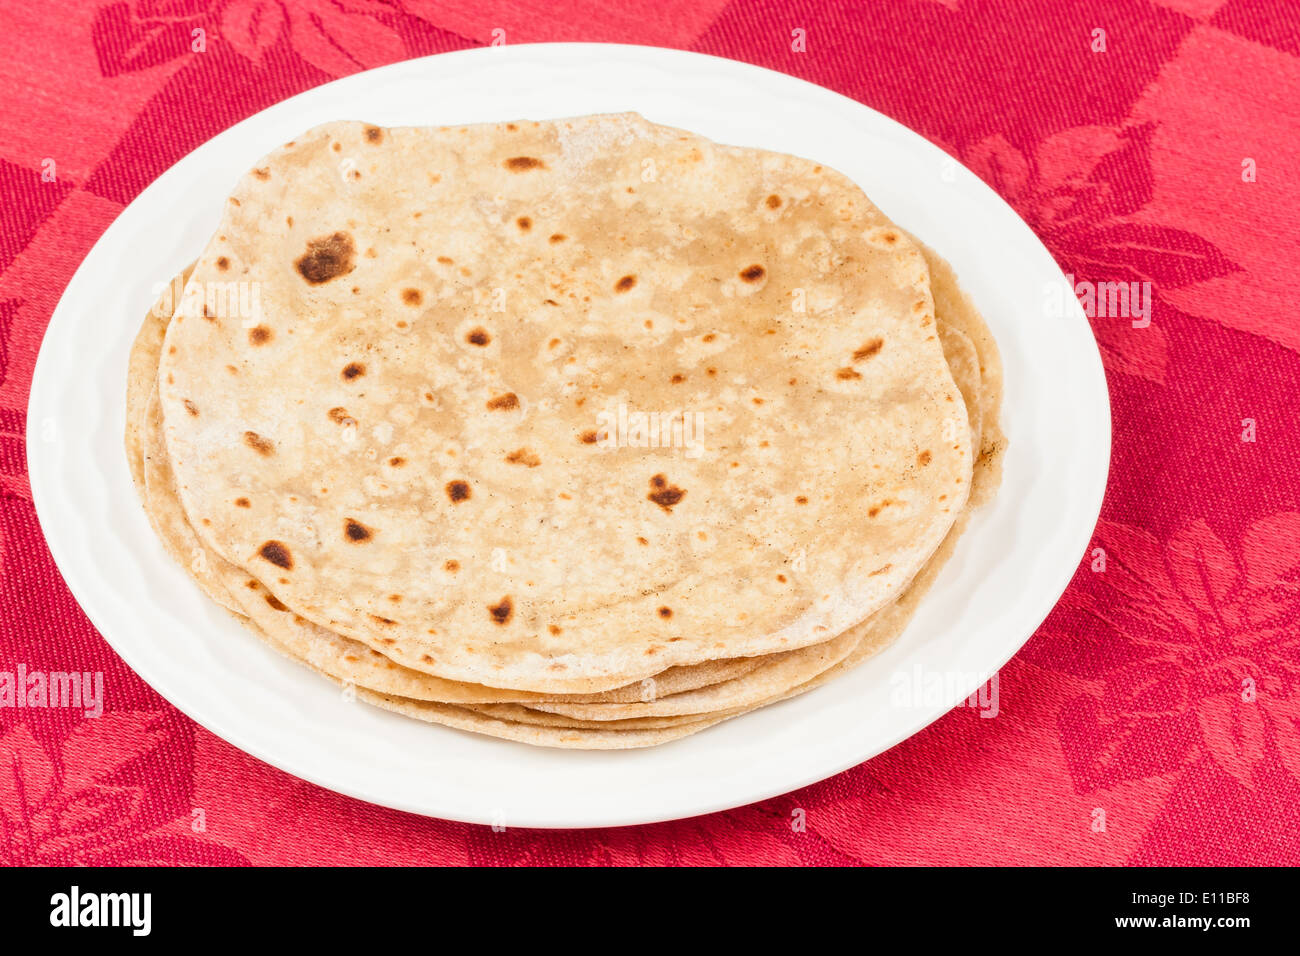 Homemade stack of chapati (indian bread) on a plate. Stock Photo